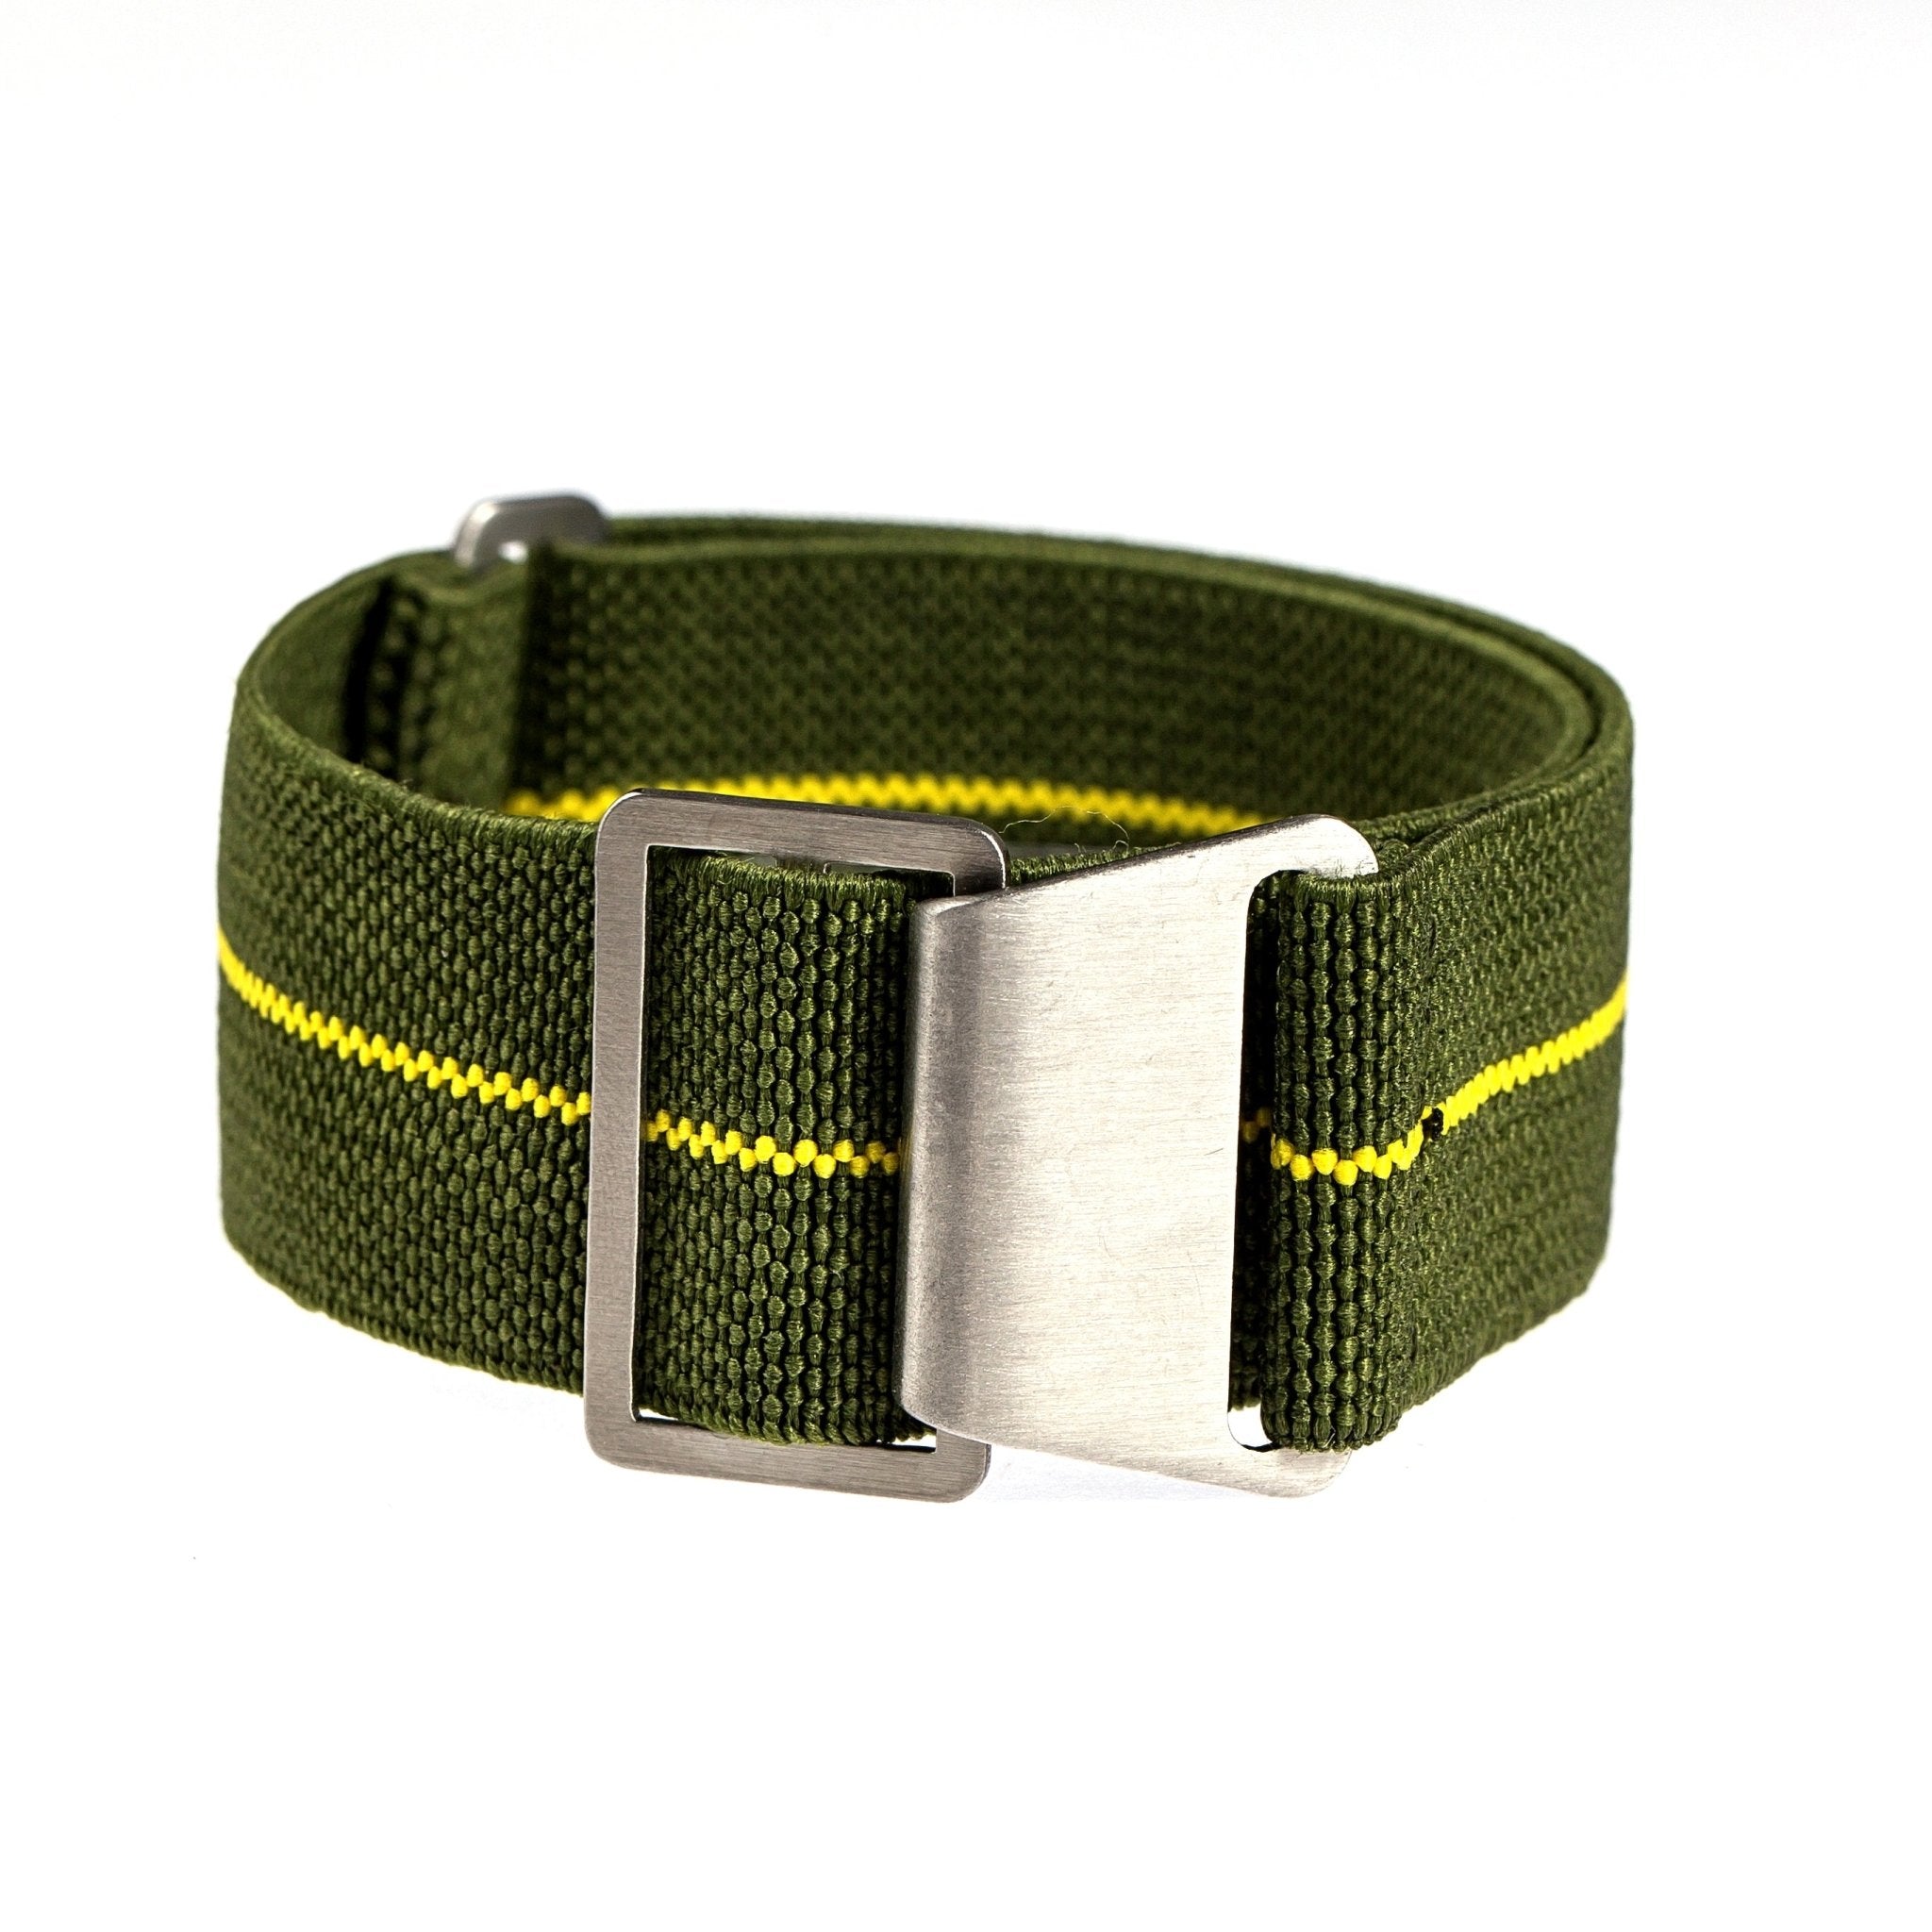 Marine Nationale Parachute Elastic Loop Strap Army Green with Yellow Line (2417) -StrapSeeker